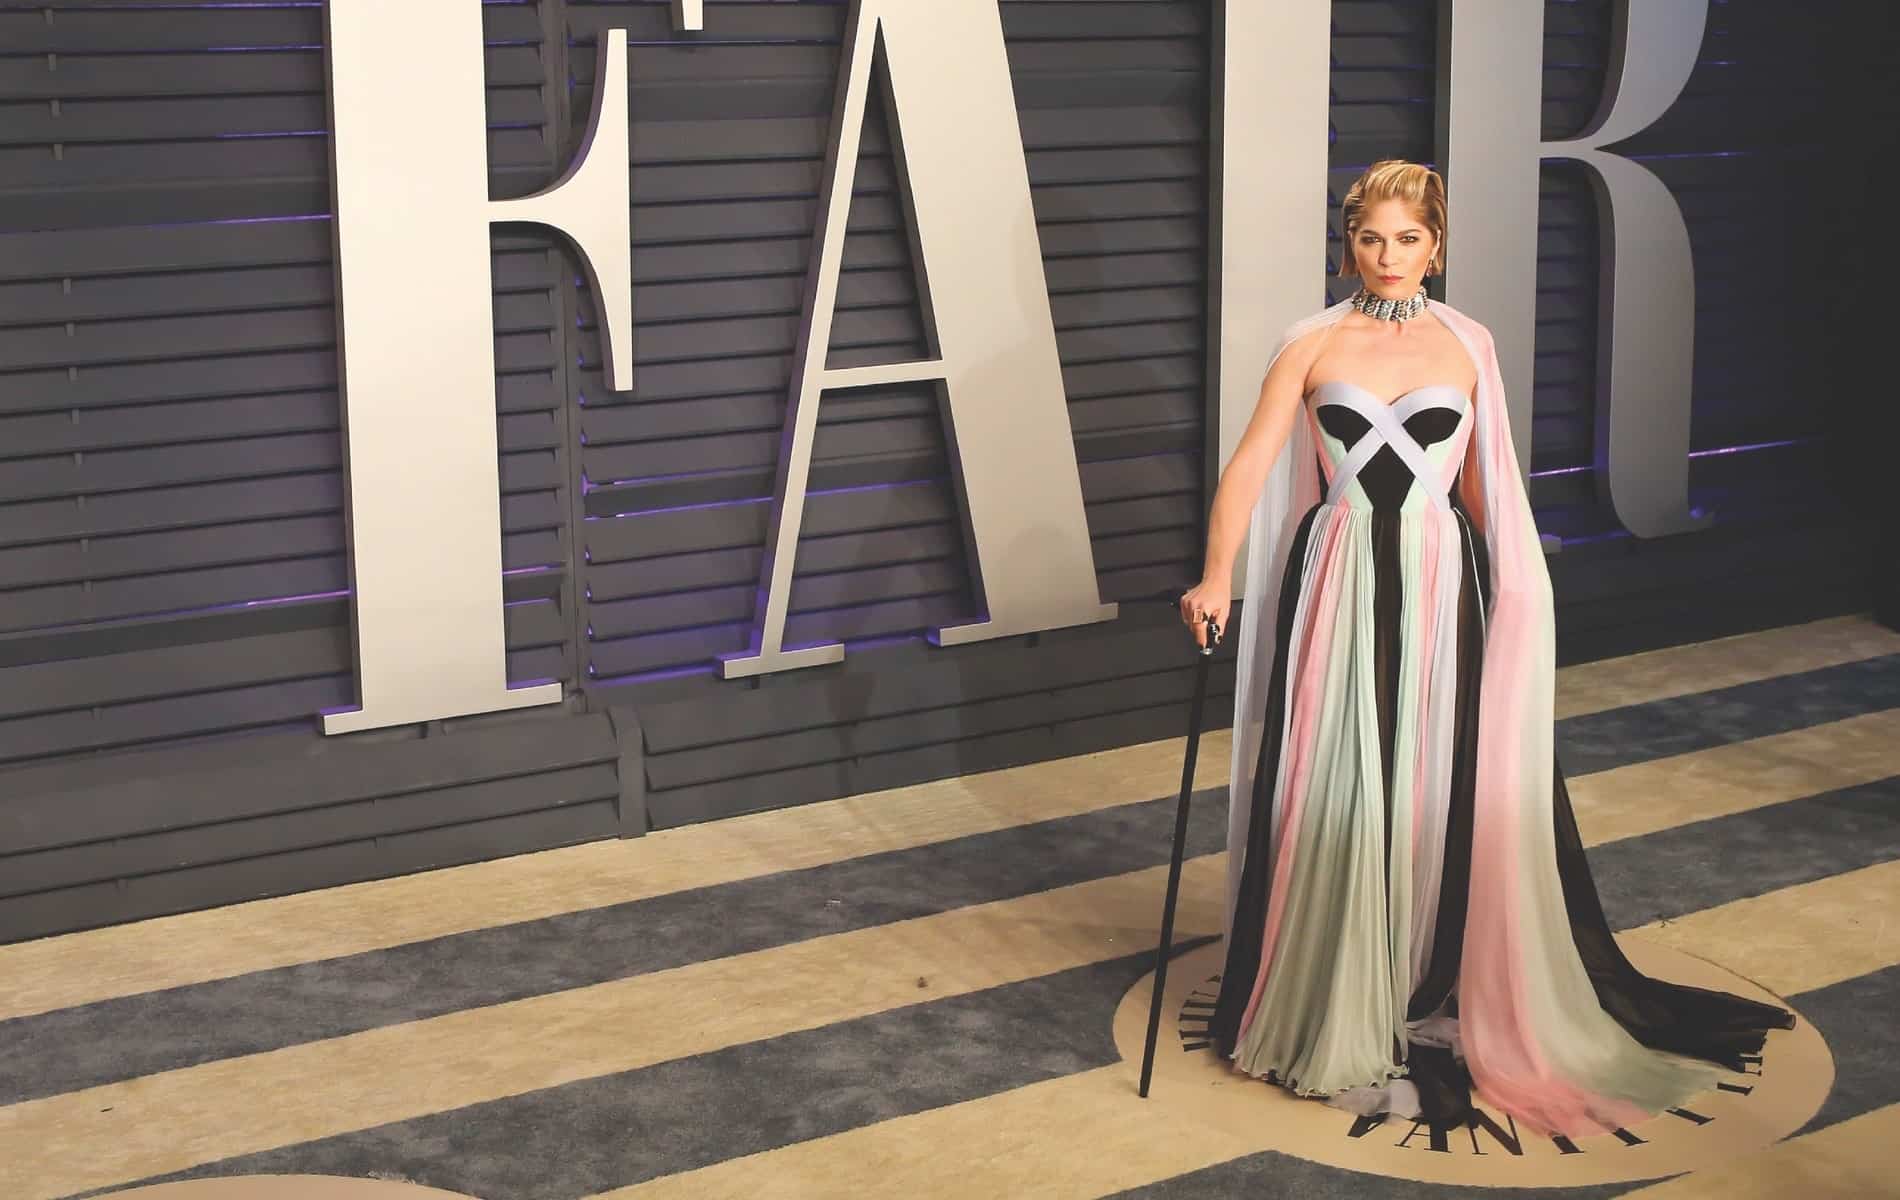 Actress Selma Blair attends the Vanity Fair Oscars Party in February of 2019 following her diagnosis with multiple sclerosis in August of 2018.